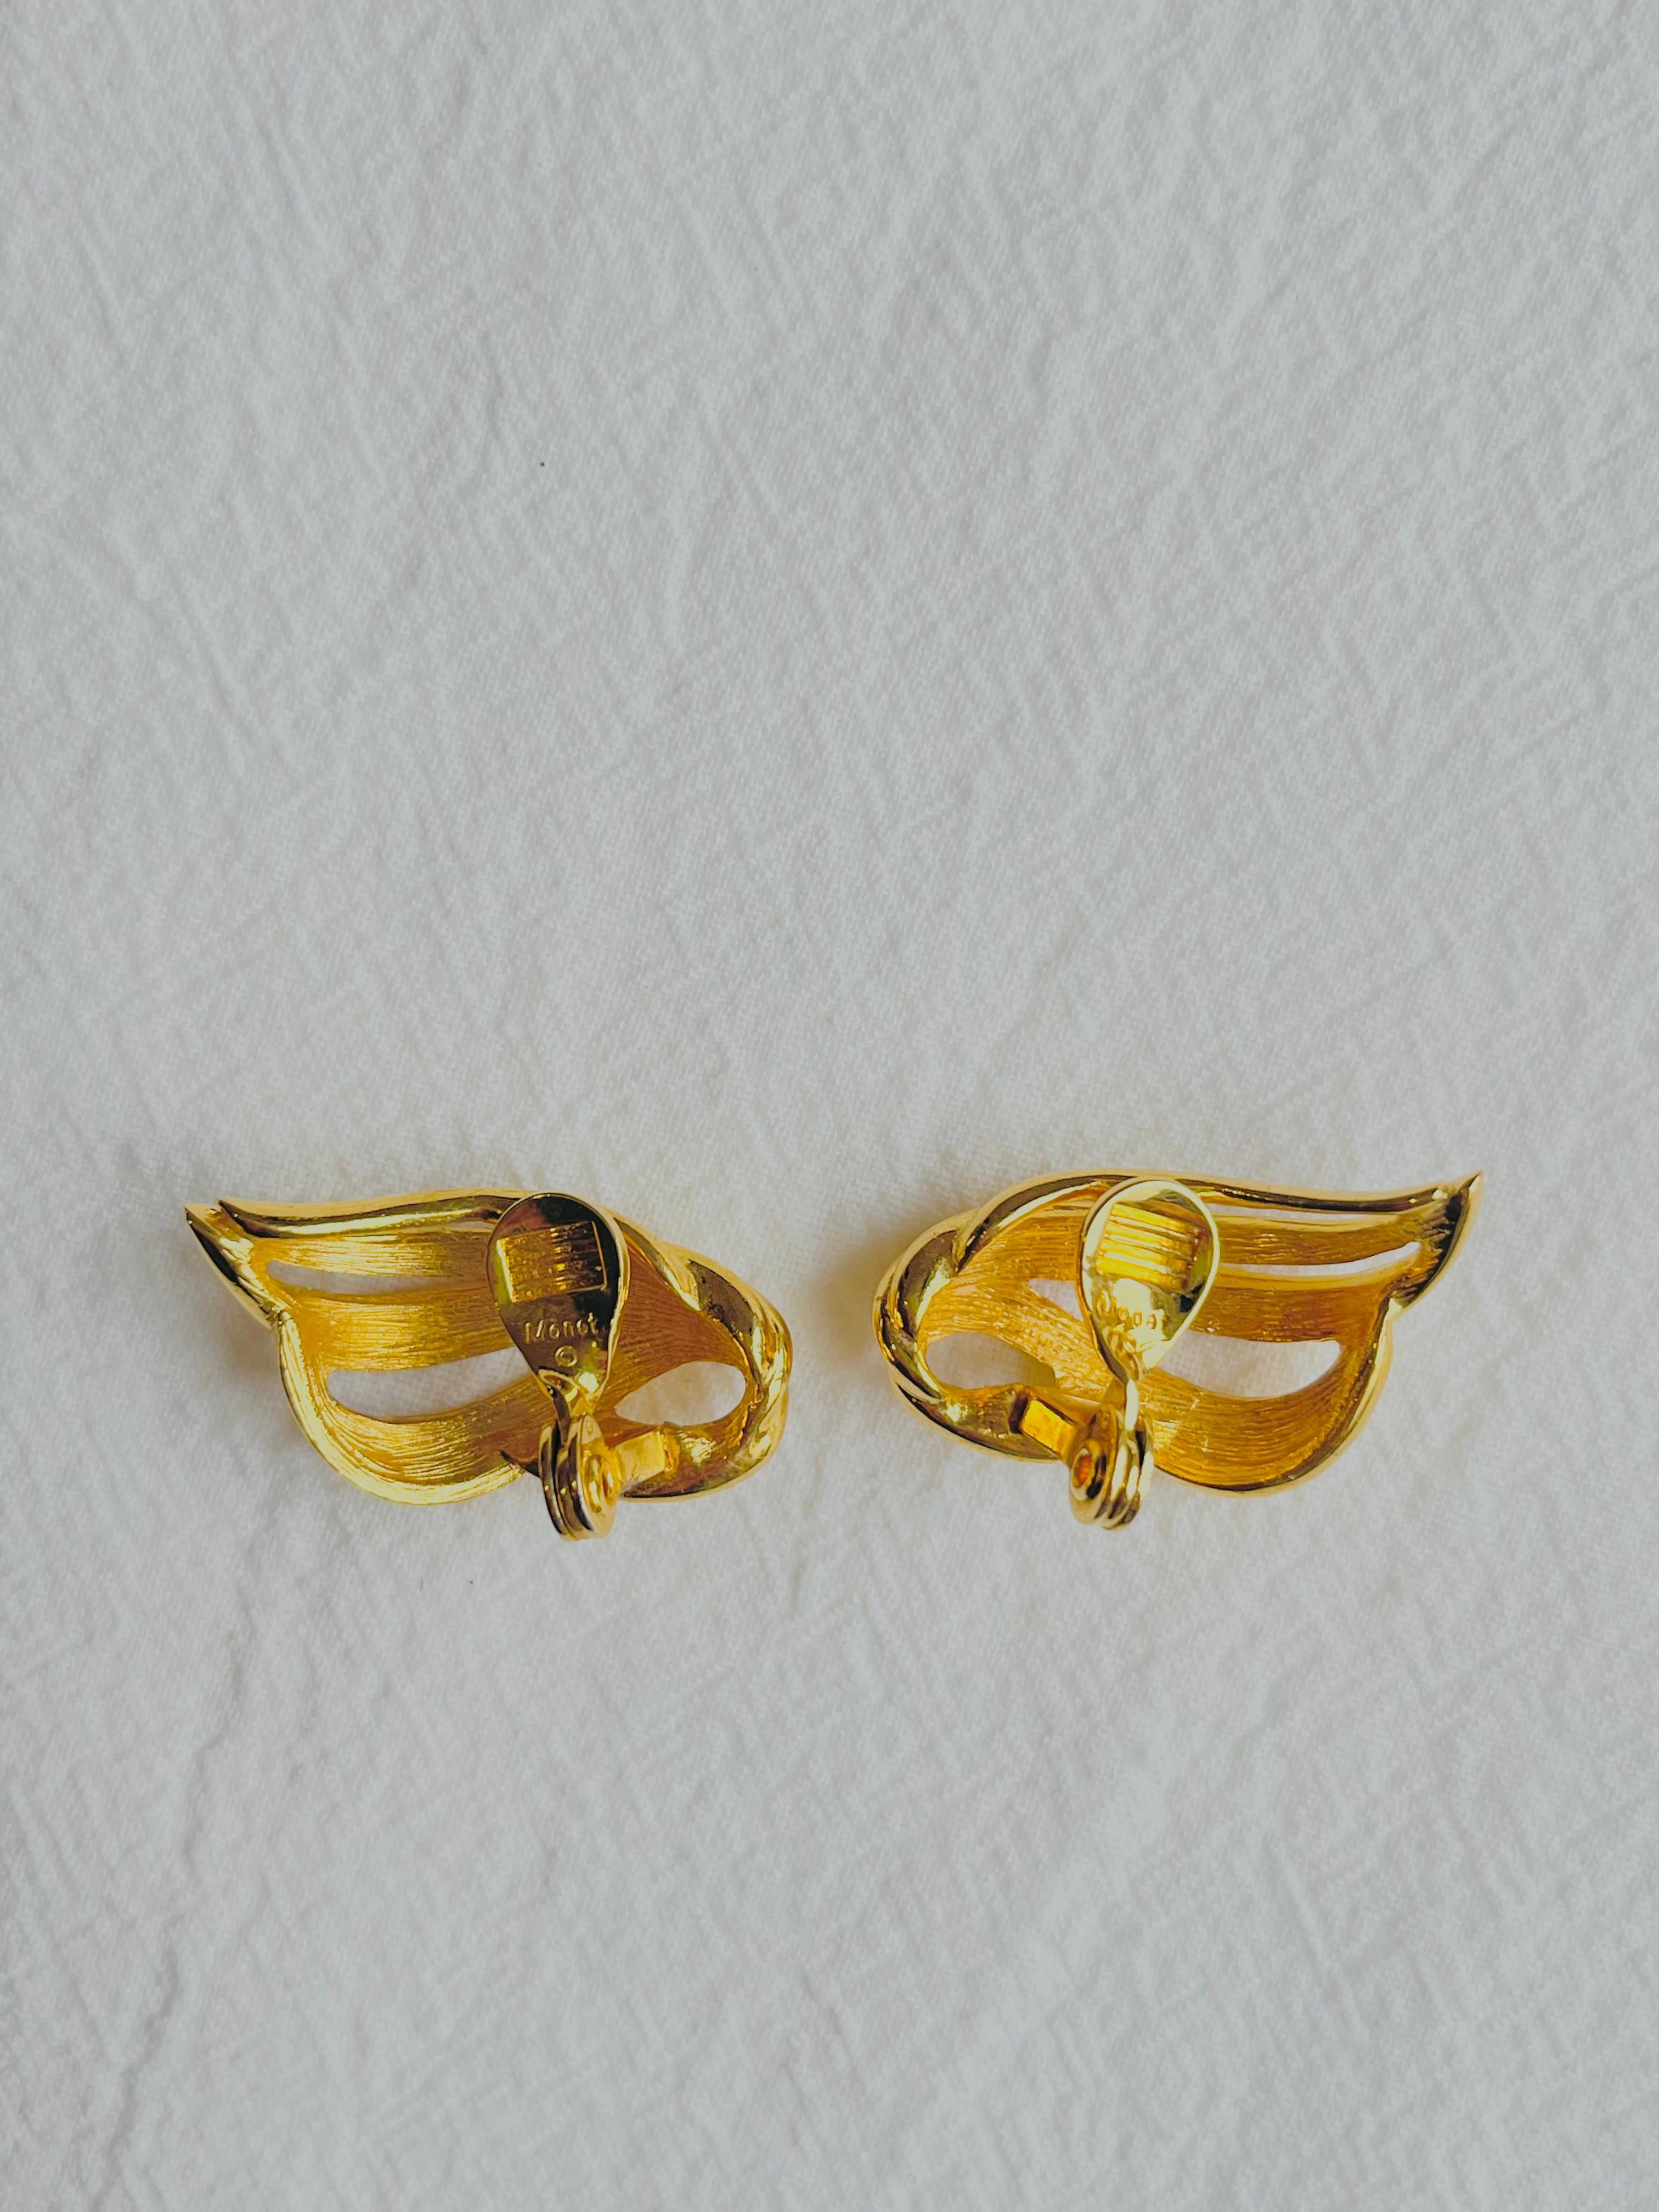 Monet Vintage 1970s Classic Openwork Wing Fire Leaf Elegant Gold Clip Earrings For Sale 5